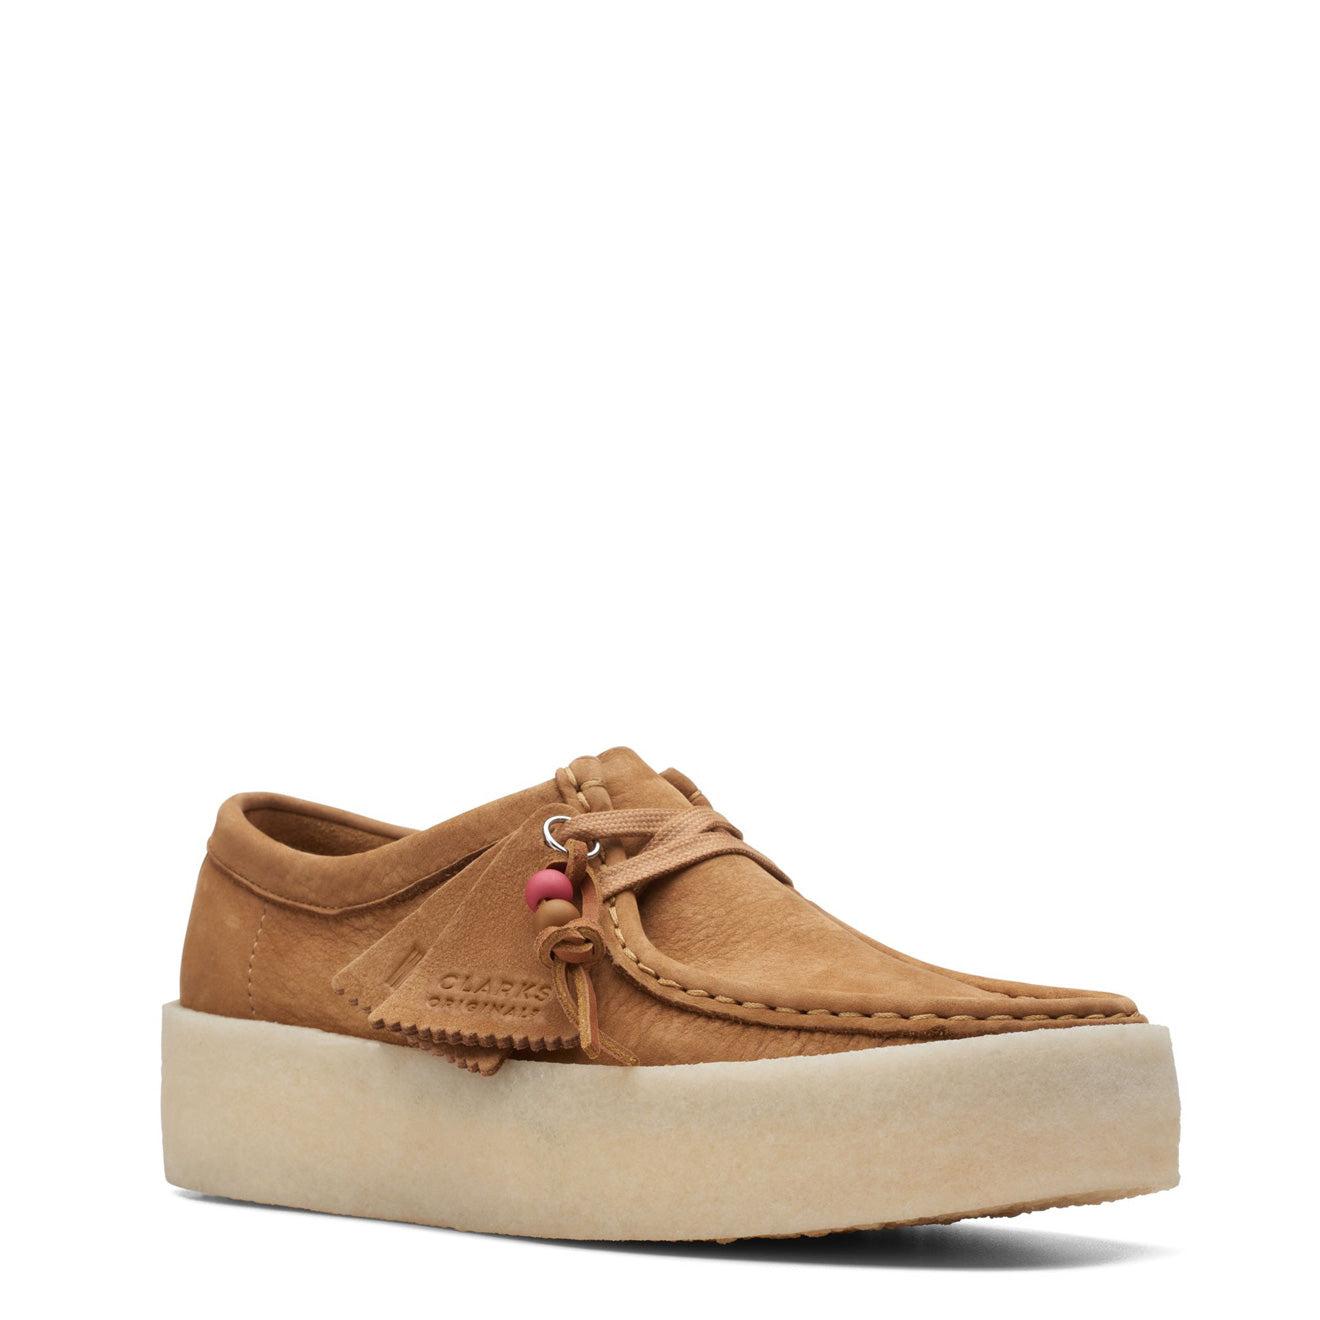 Clarks Wallabee Cup Shoes Tan Nubuck in Brown | Lyst